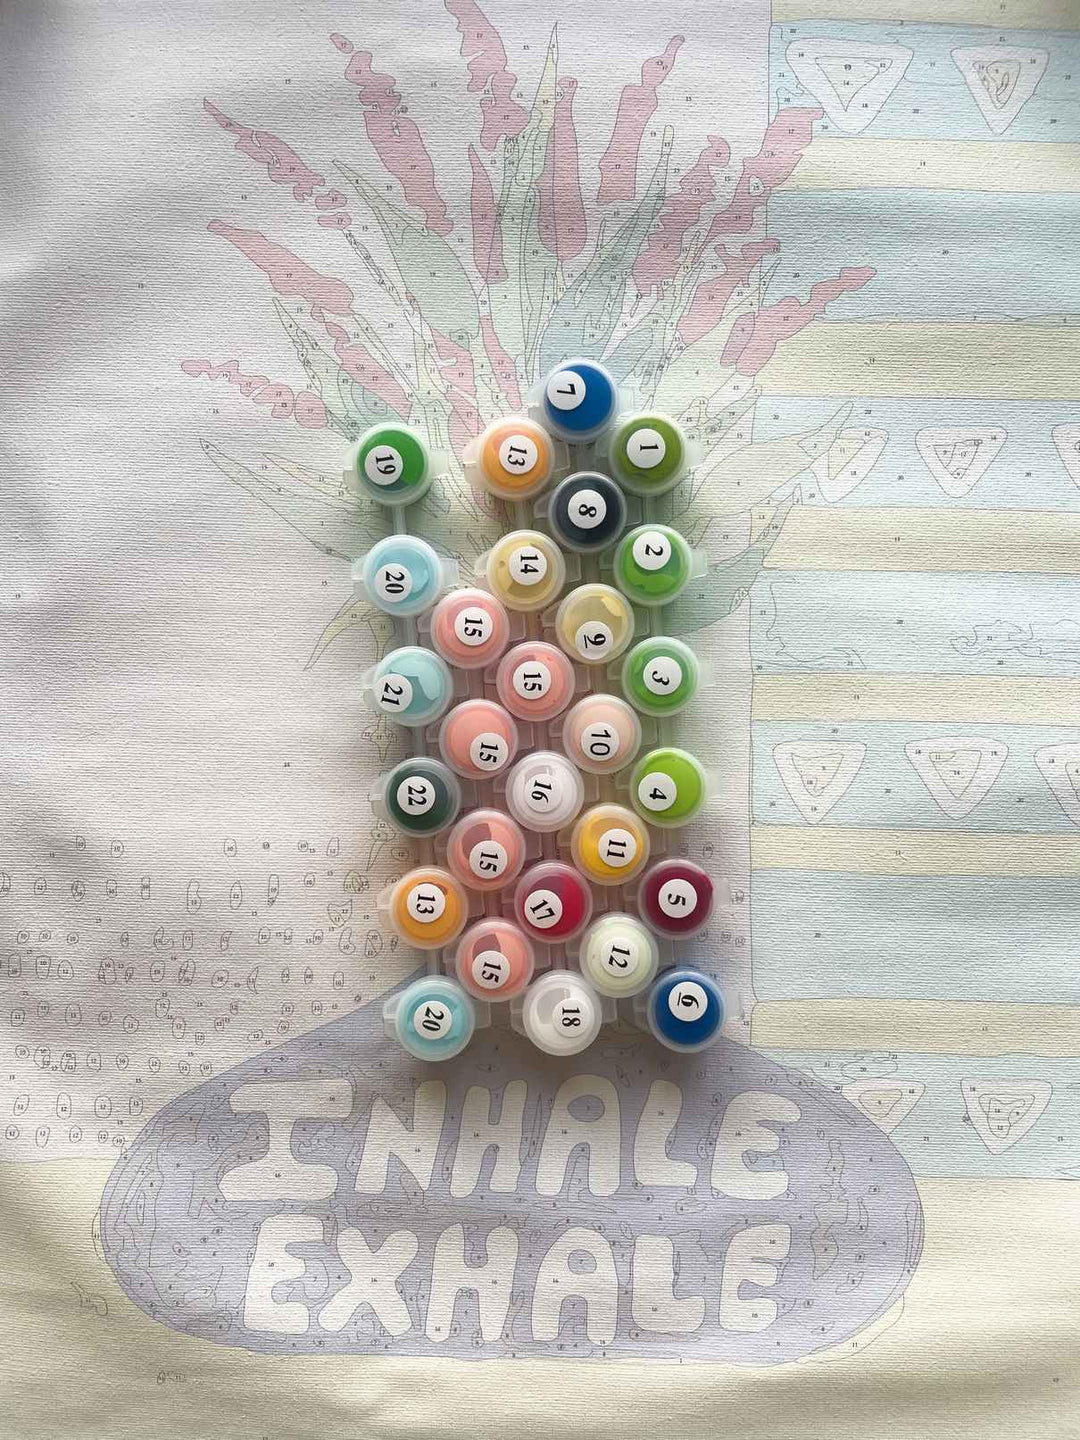 Inhale Exhale Paint By Numbers Kit